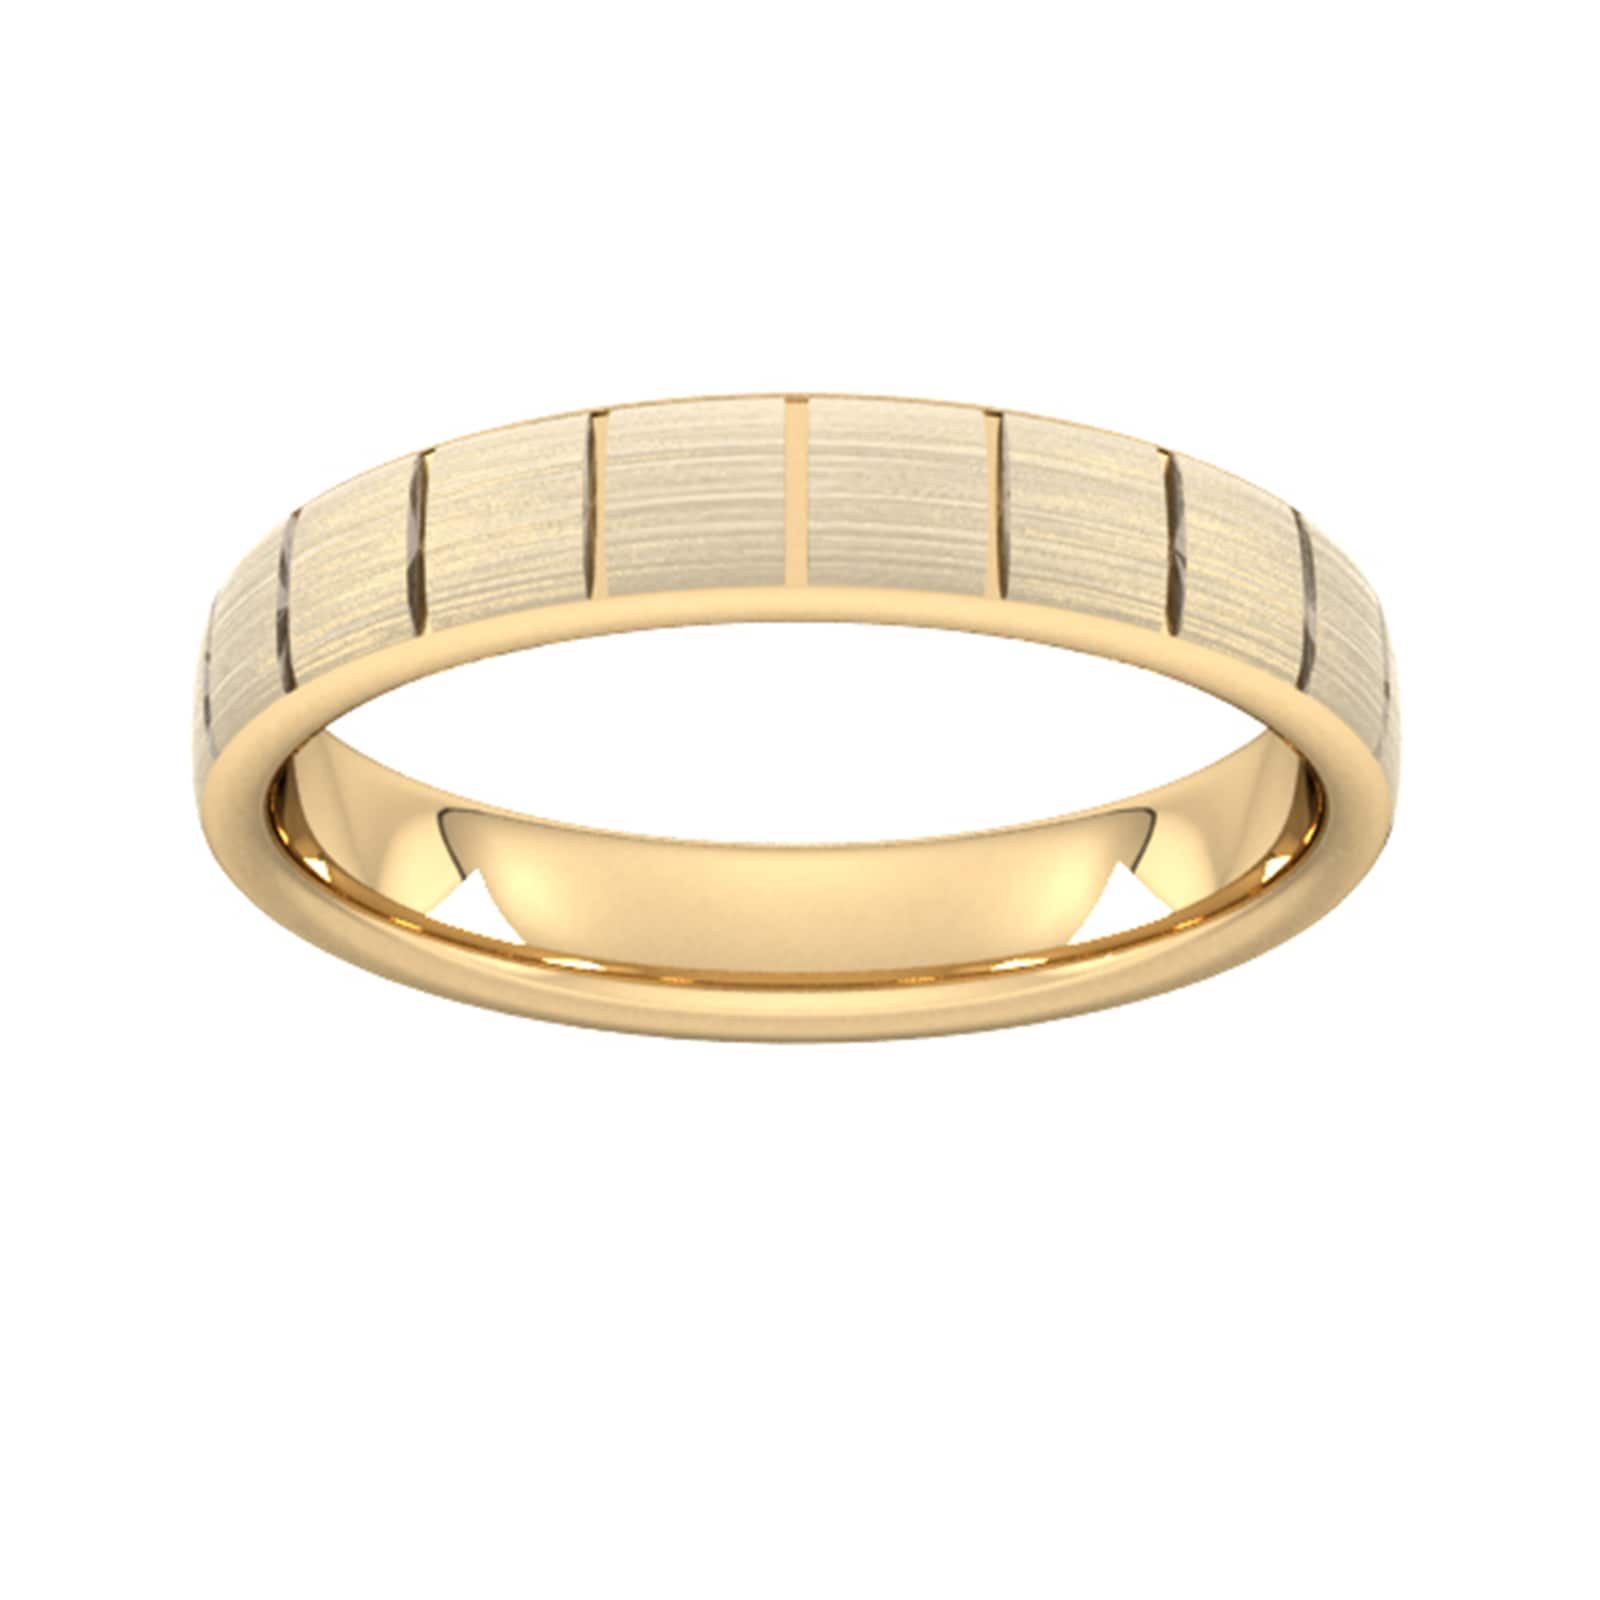 4mm Traditional Court Heavy Vertical Lines Wedding Ring In 9 Carat Yellow Gold - Ring Size U